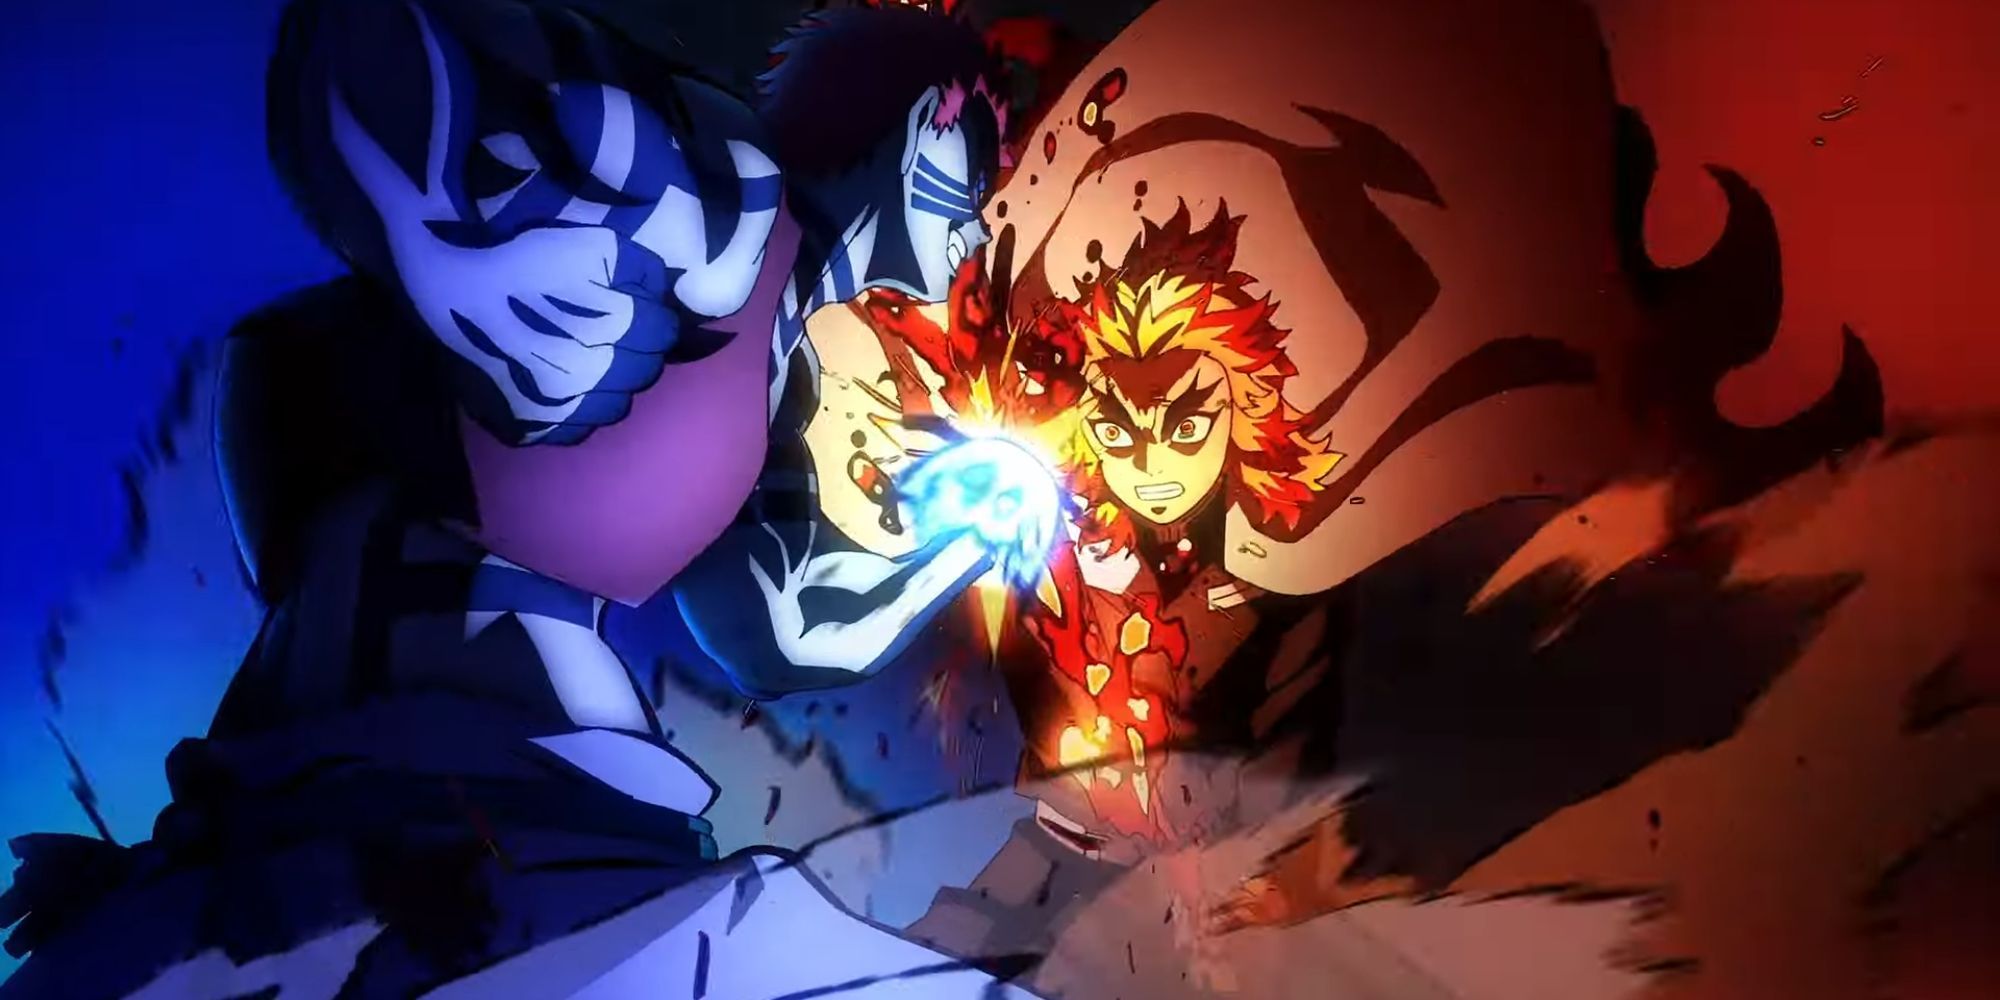 Rengoku and Akaza fighting in the second Demon Slayer opening.